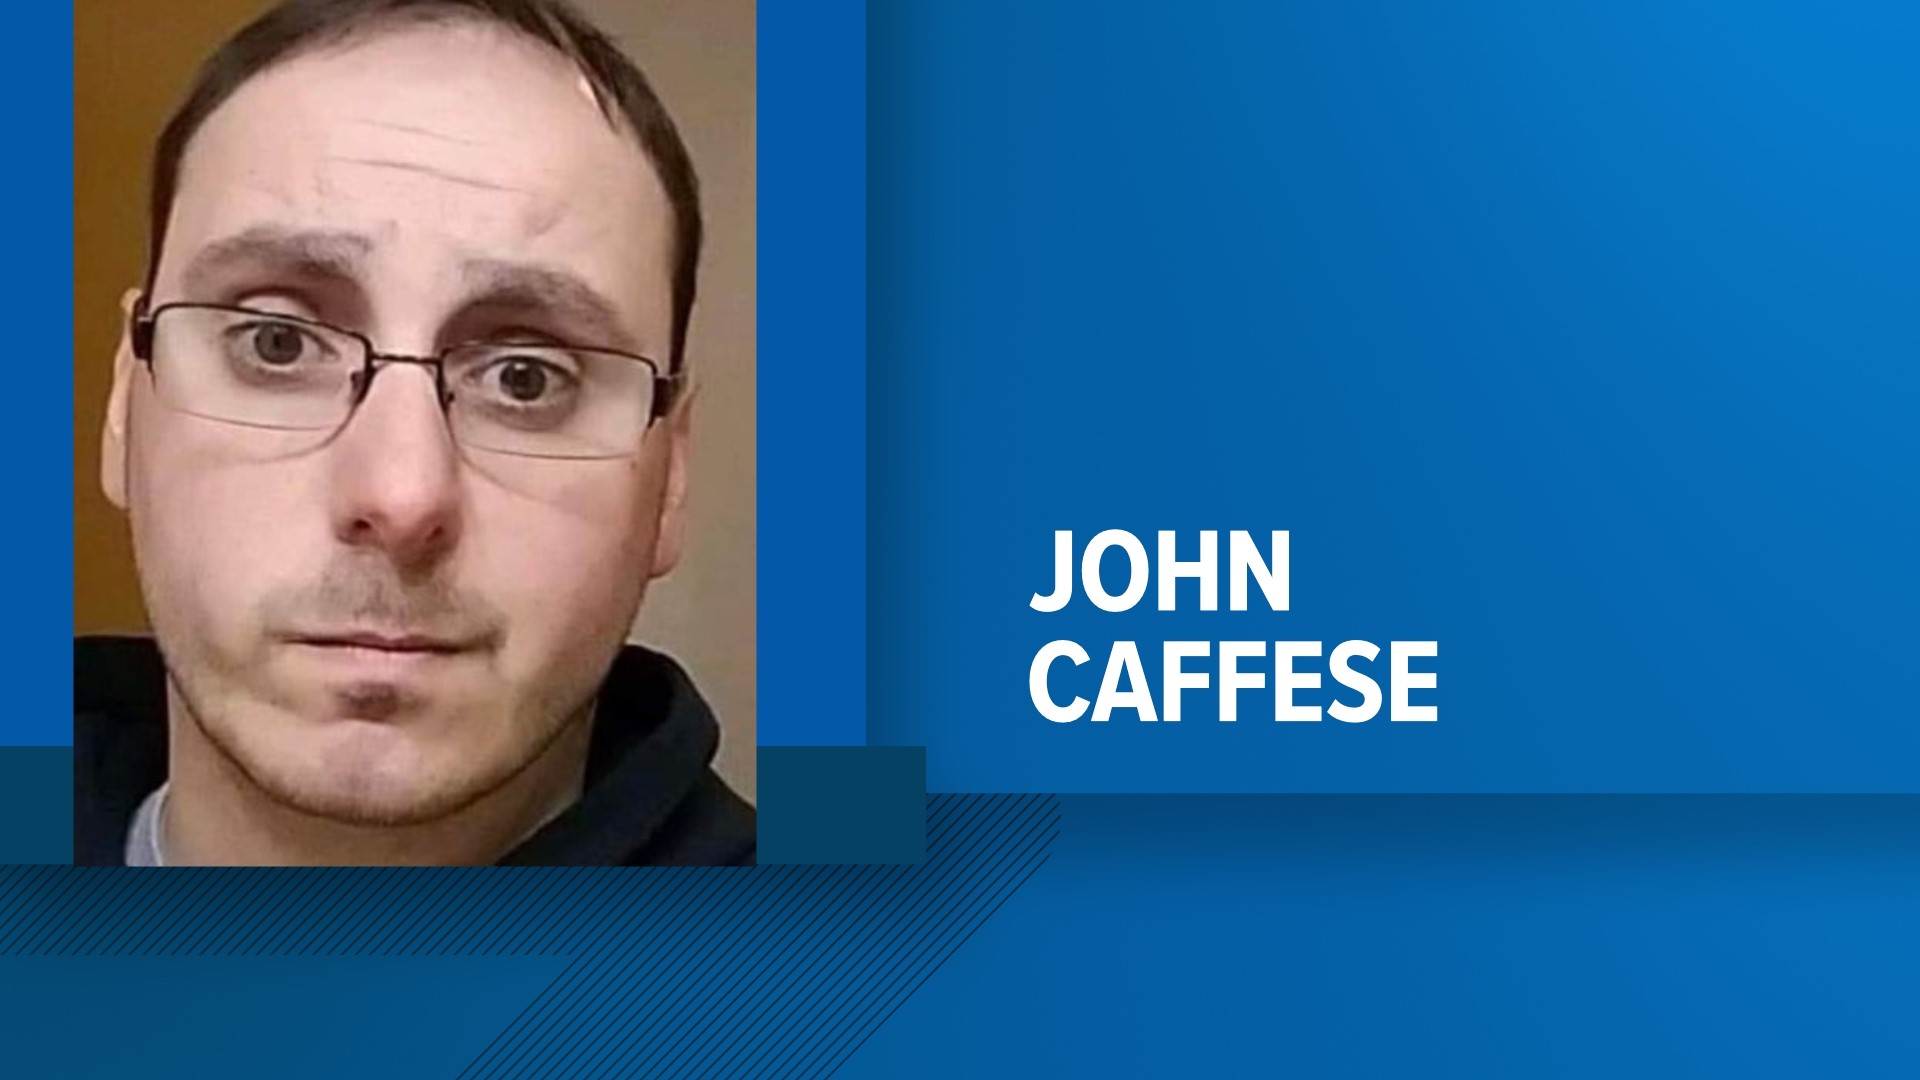 John Caffese is facing theft and related charges after allegedly lying about where he lived.